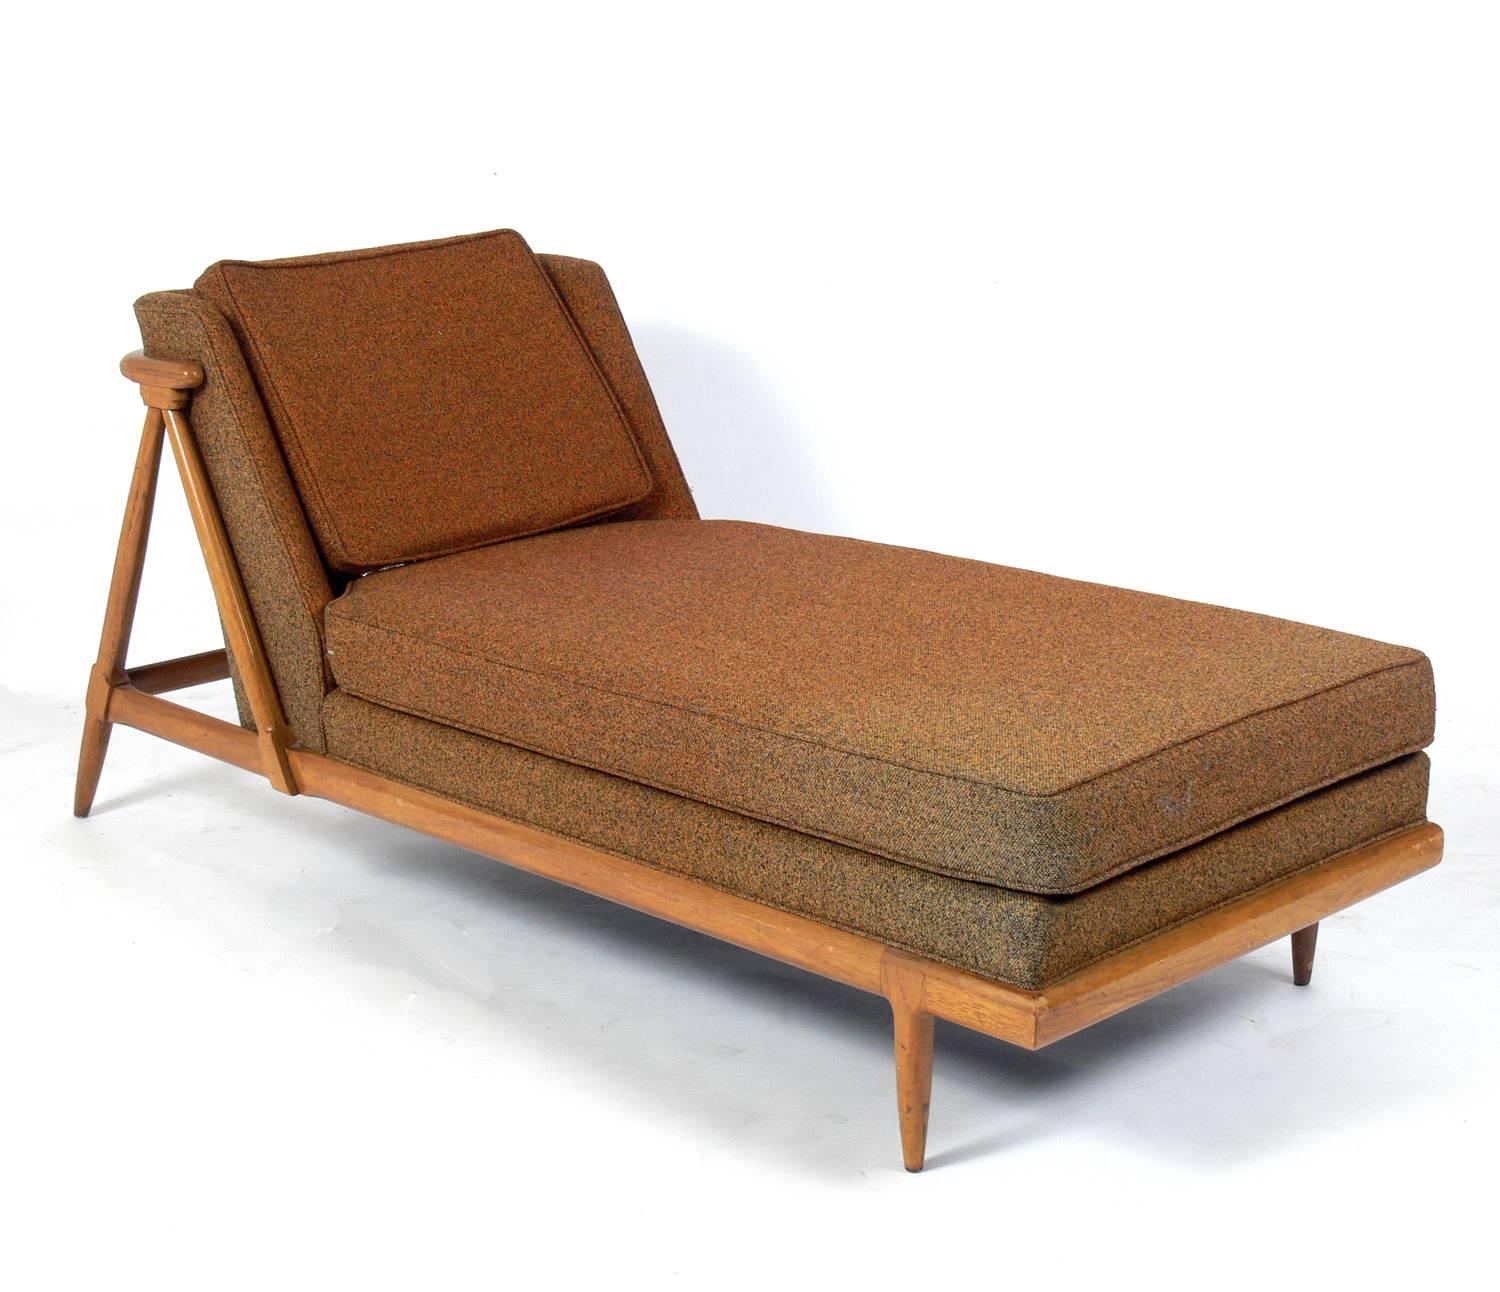 mulder chaise lounge